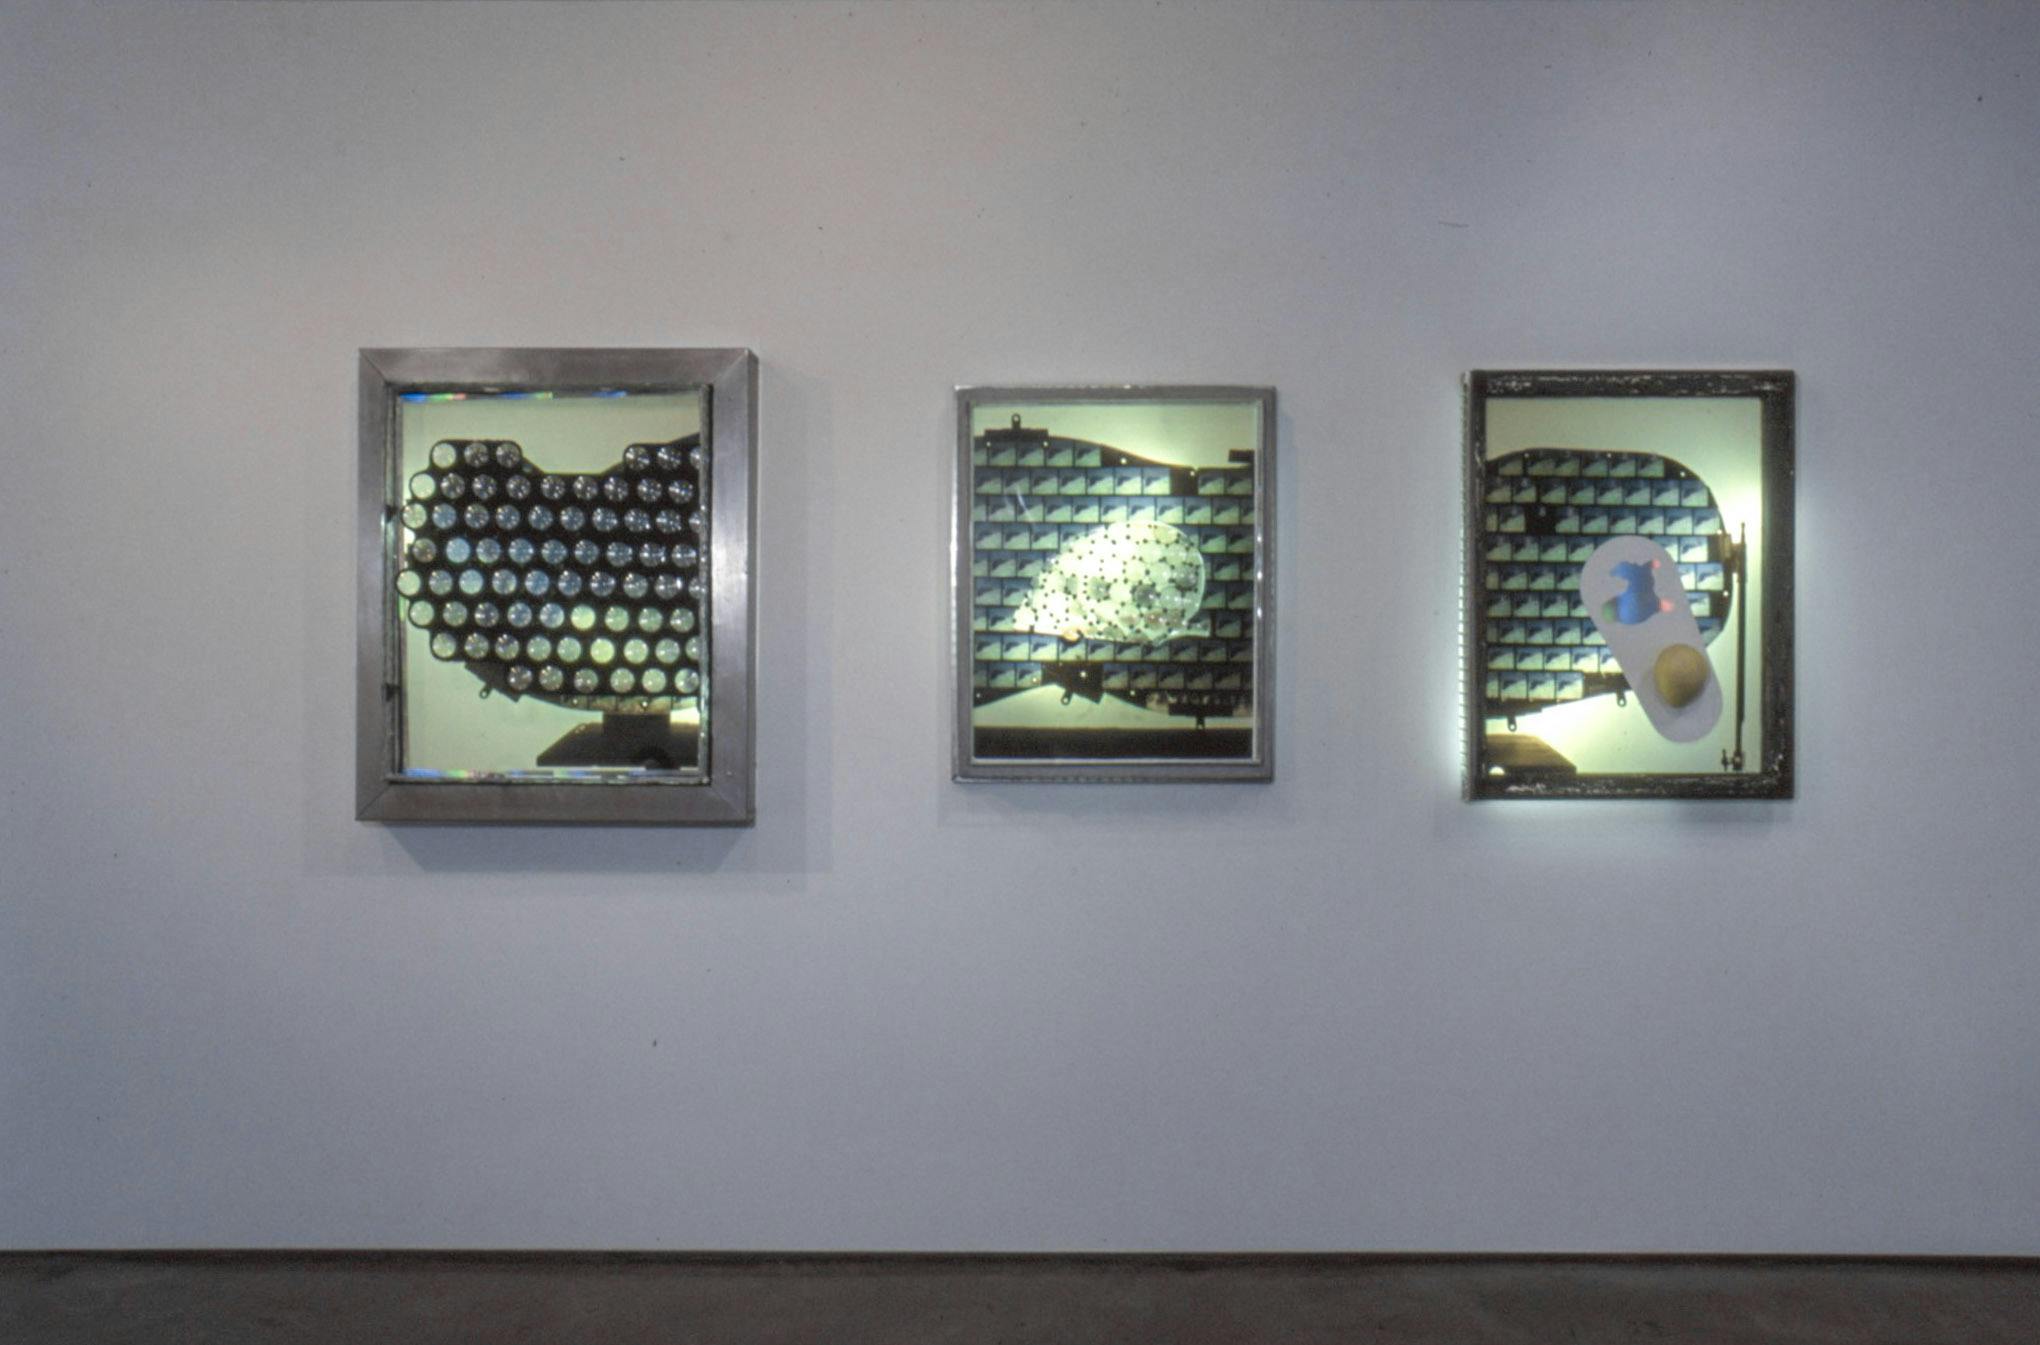 Installation image of Jerry Pethick’s artworks. On a wall, a set of three works that look like shadow muppets are installed in light box for exhibiting photography. Each of them are illuminated by pale-green light in the light boxes.